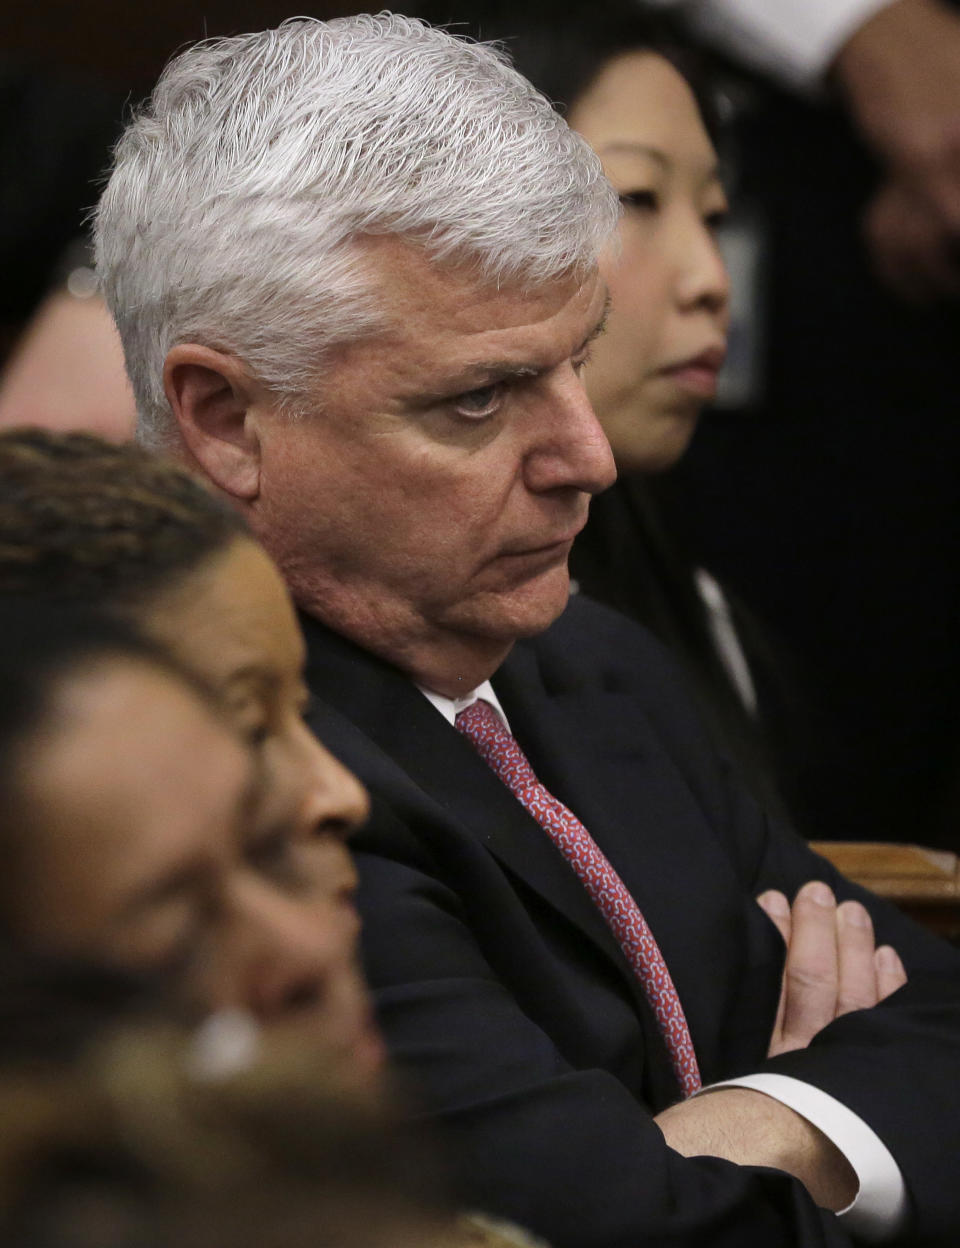 Suffolk County District Attorney Daniel F. Conley, center, is seated in the gallery during closing arguments in the double murder trial for former New England Patriots tight end Aaron Hernandez at Suffolk Superior Court, Thursday, April 6, 2017, in Boston. Hernandez is on trial for the July 2012 killings of Daniel de Abreu and Safiro Furtado who he encountered in a Boston nightclub. The former NFL player is already serving a life sentence in the 2013 killing of semi-professional football player Odin Lloyd. (AP Photo/Steven Senne, Pool)